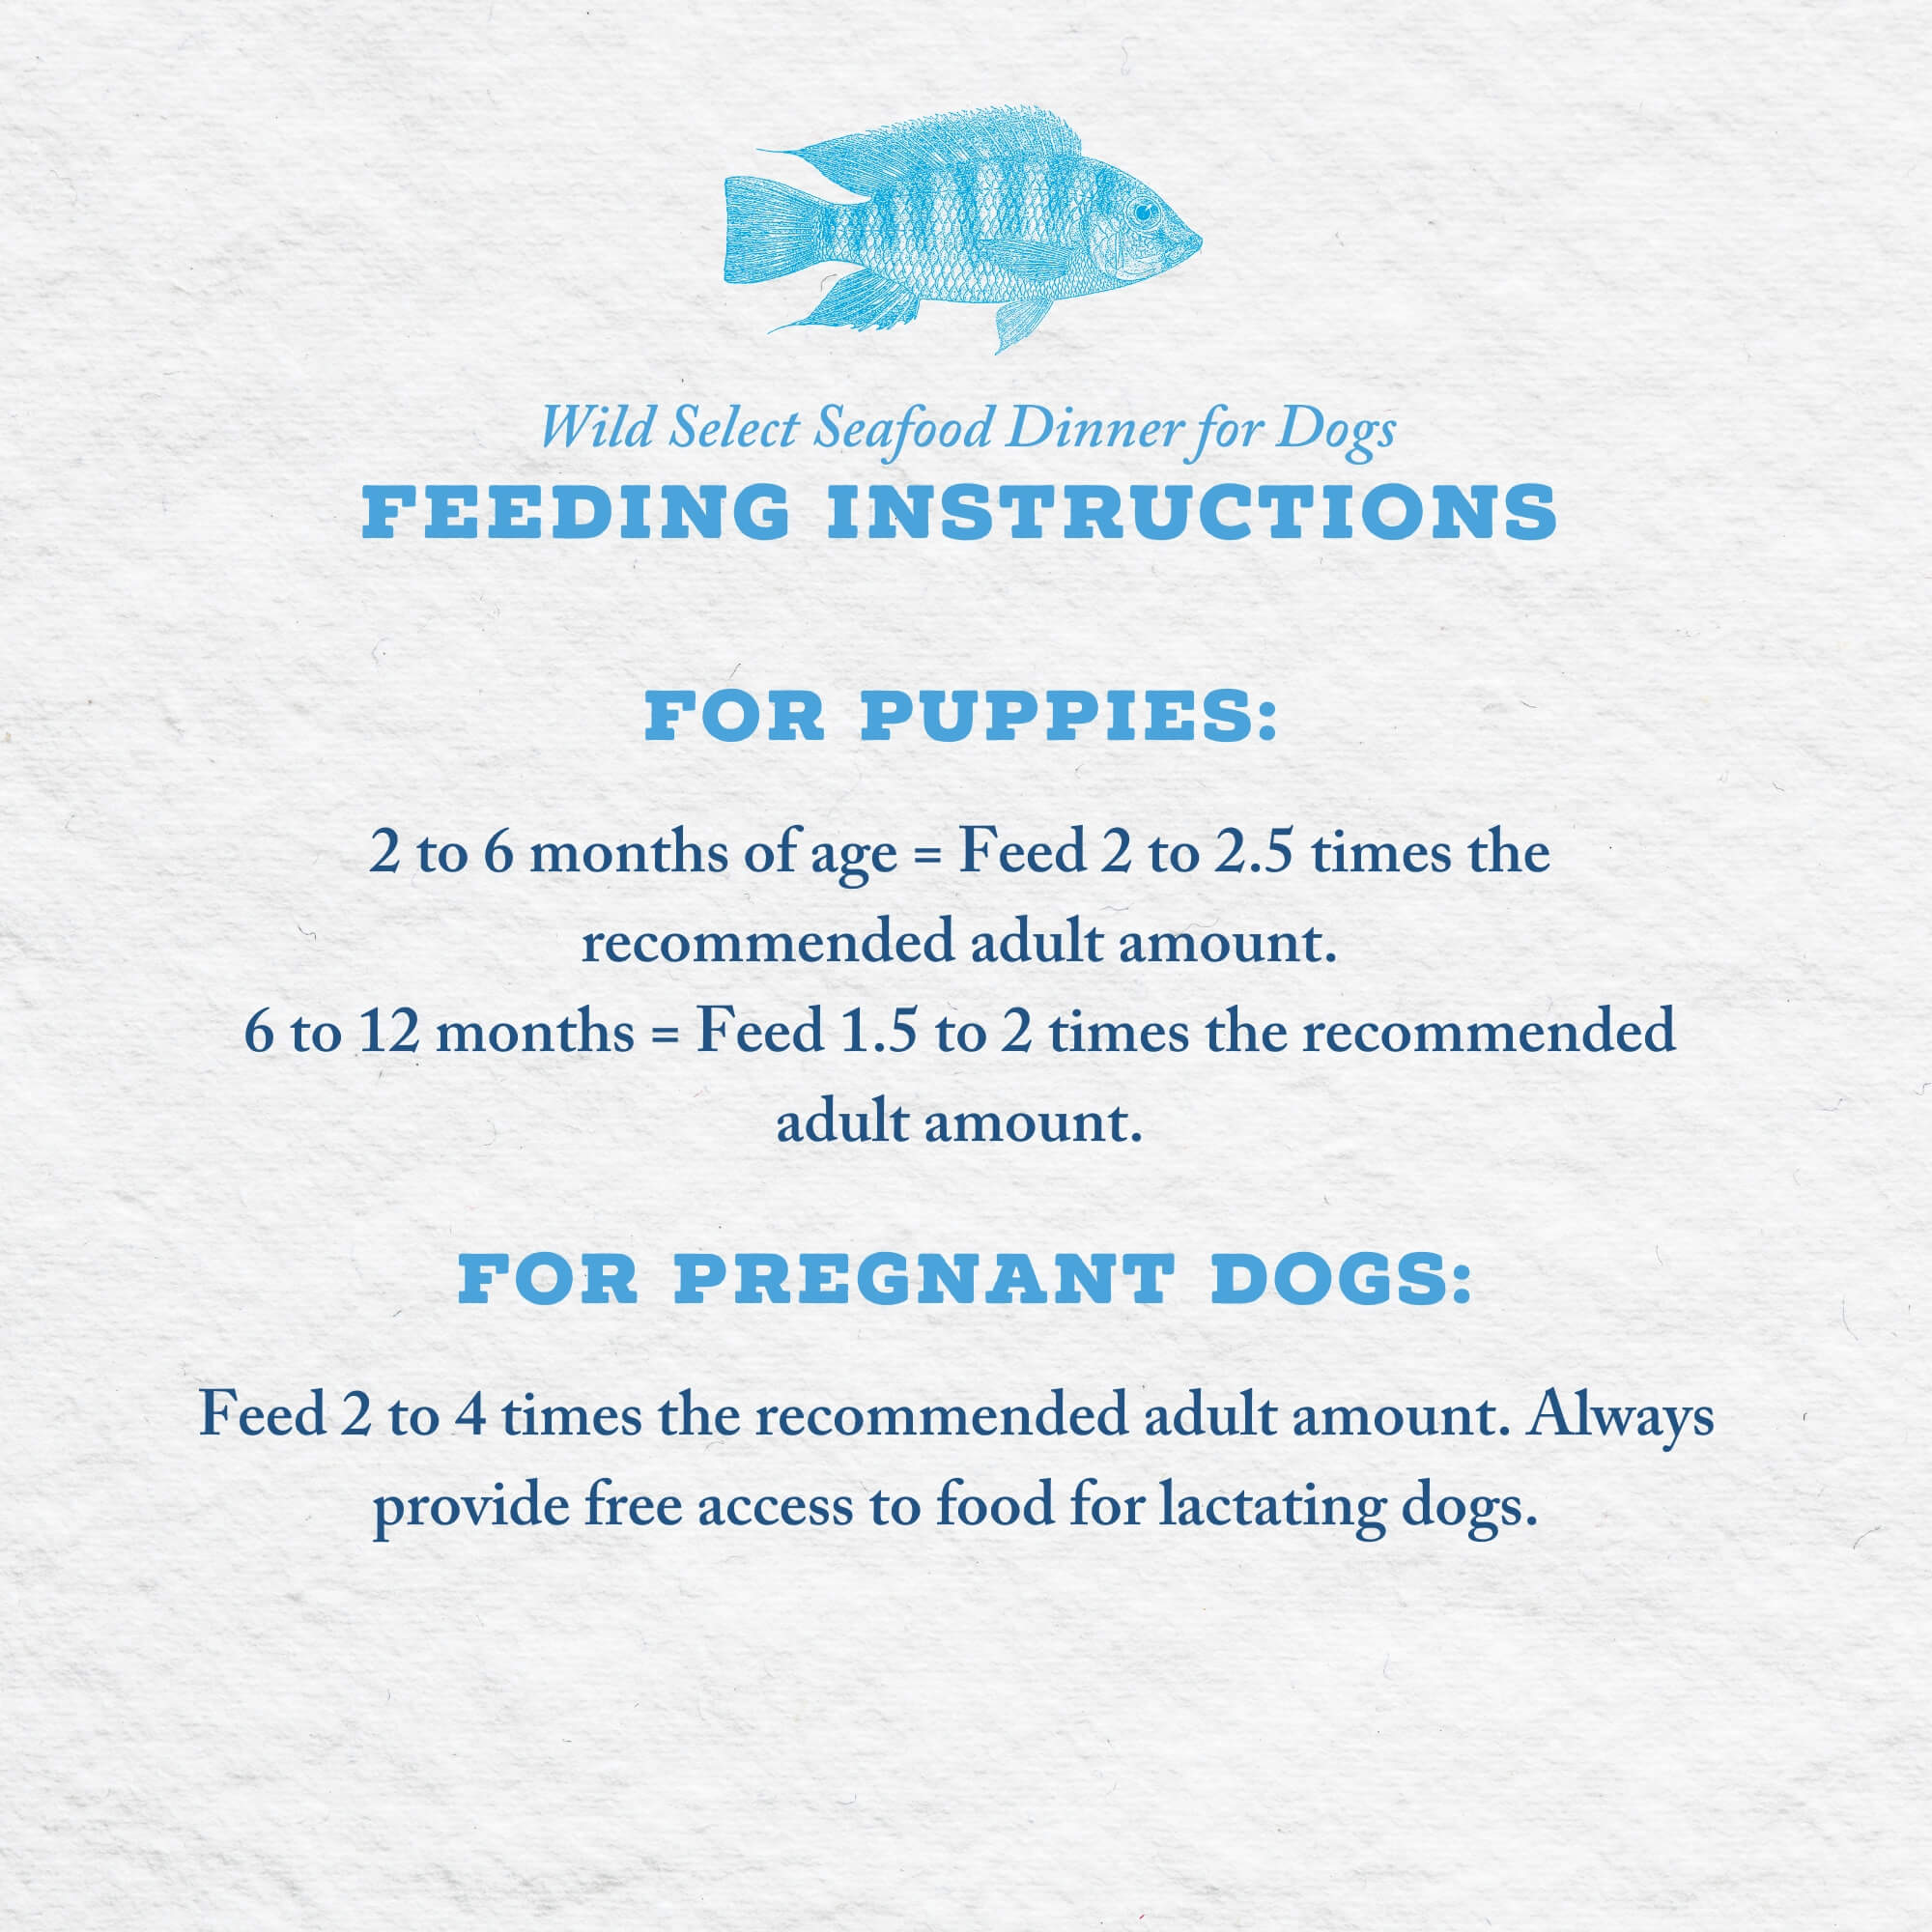 Wild Select Seafood Dinner for Dogs Feeding Instructions